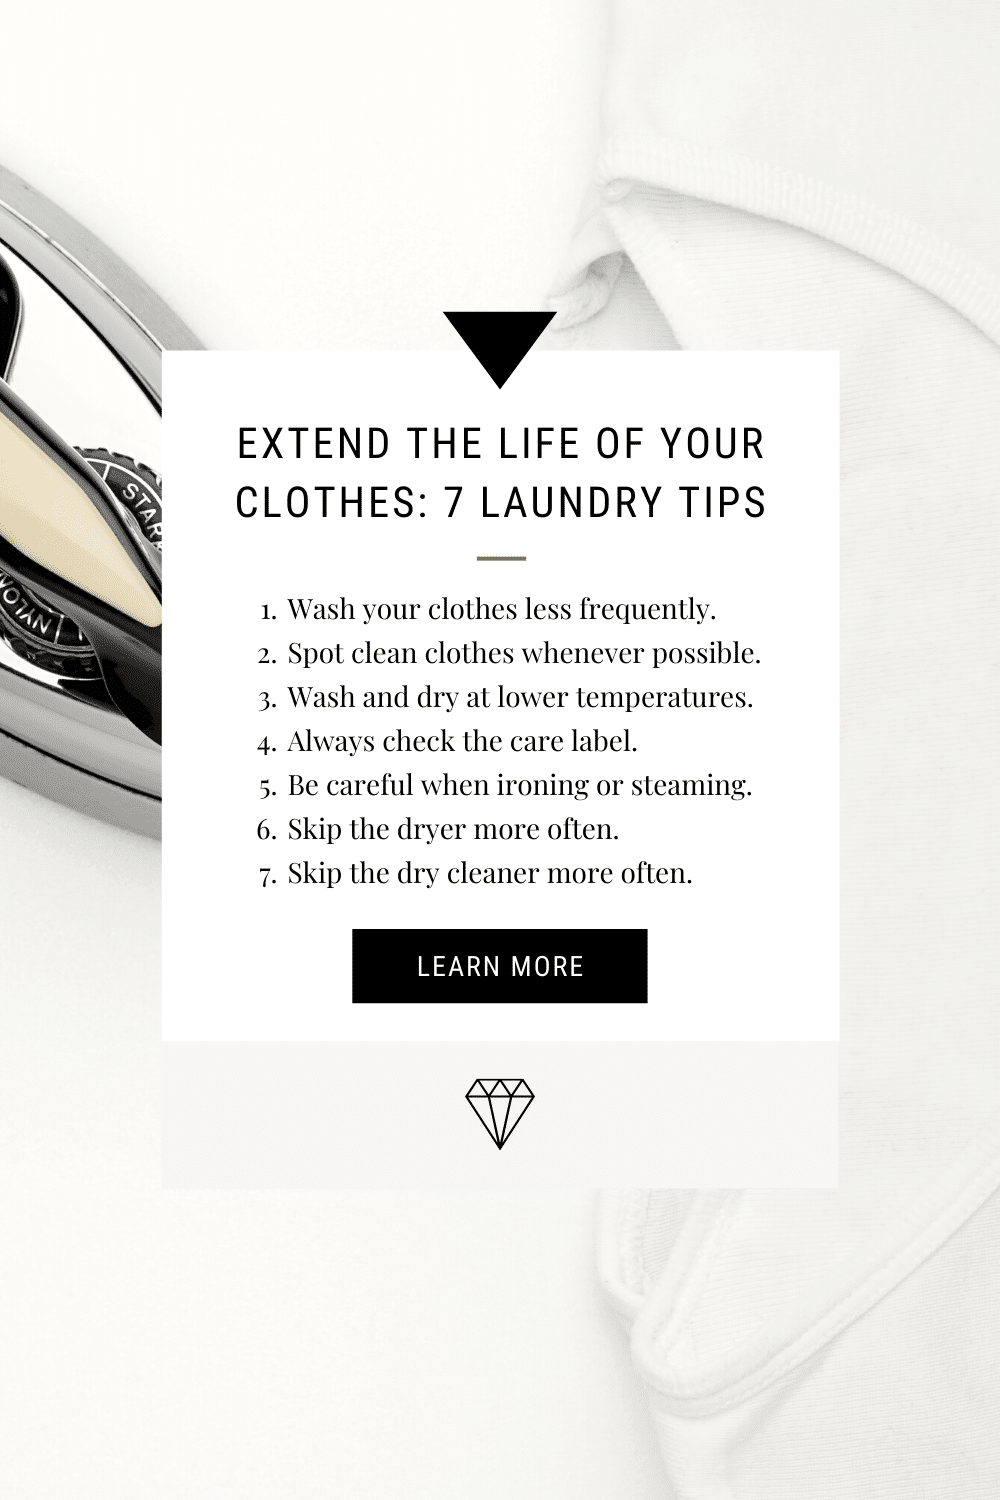 Extend the Life of Your Clothes